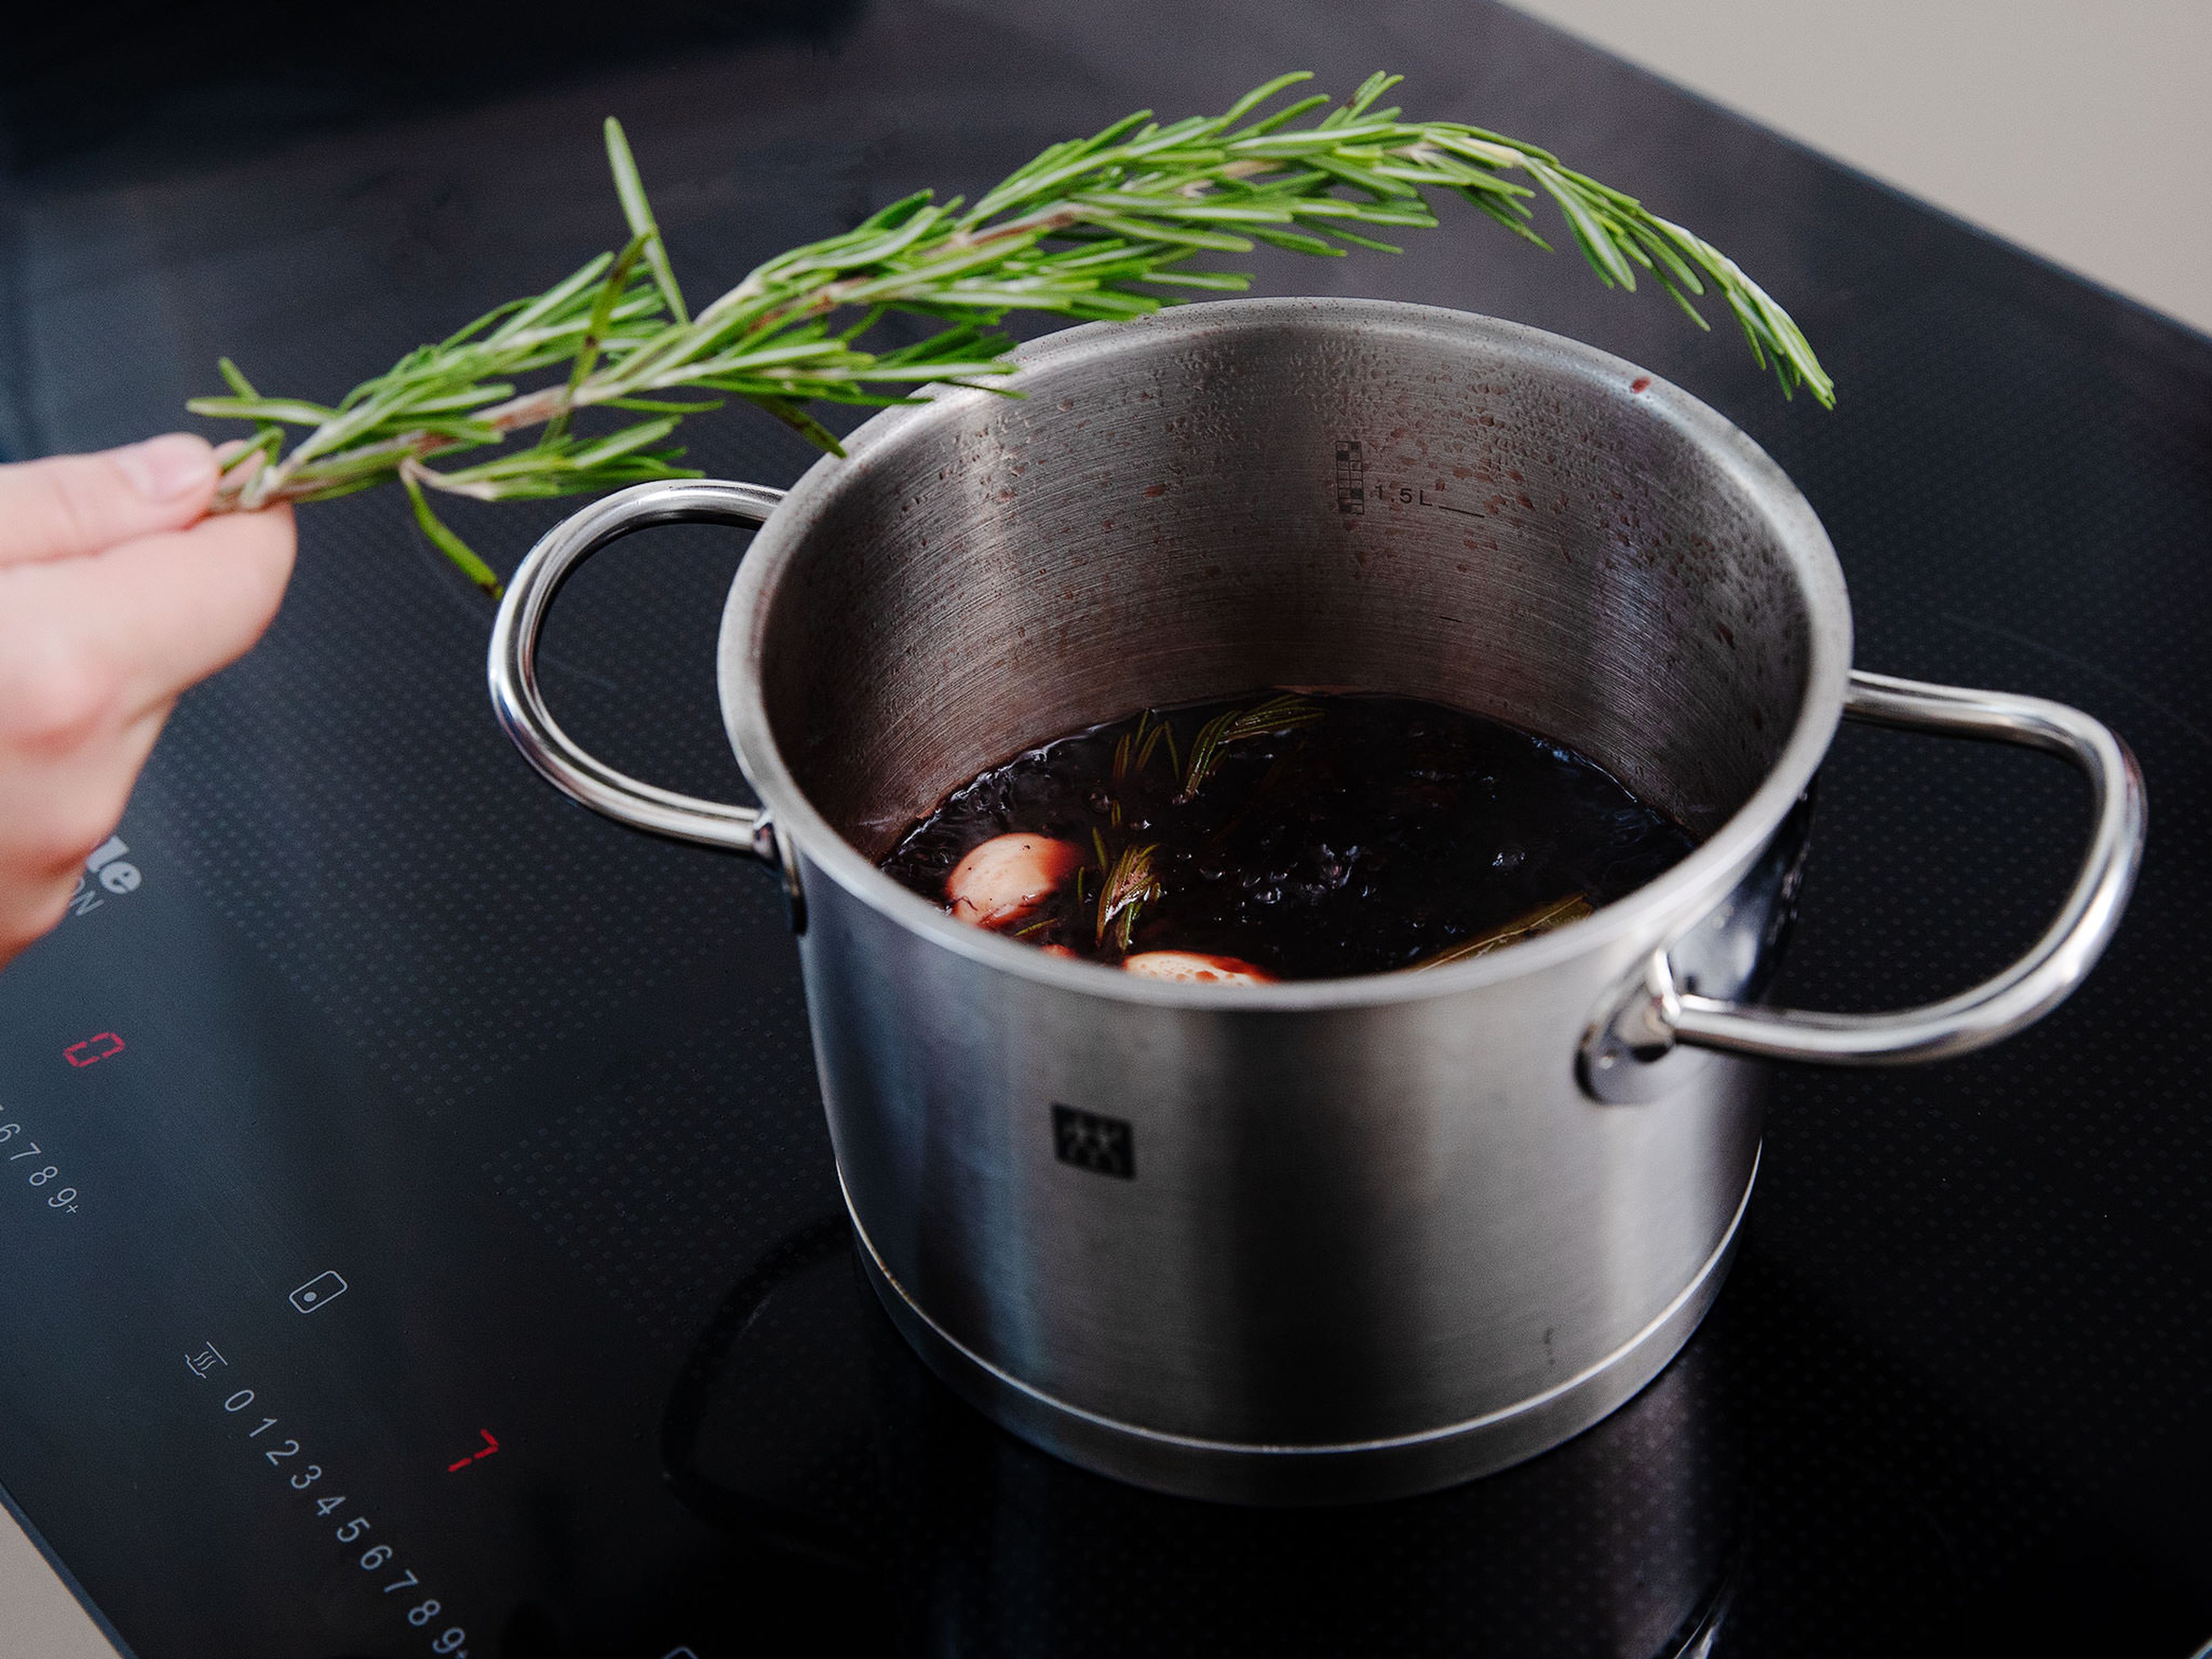 Add sugar to a pot and caramelize over medium heat. Halve and juice lemon. Add cherry juice, port wine, crème de cassis, balsamic vinegar, and lemon juice. Peel and crush garlic and add to the pot together with the bay leaf and whole rosemary sprigs. Allow the sauce to reduce over medium-low heat.